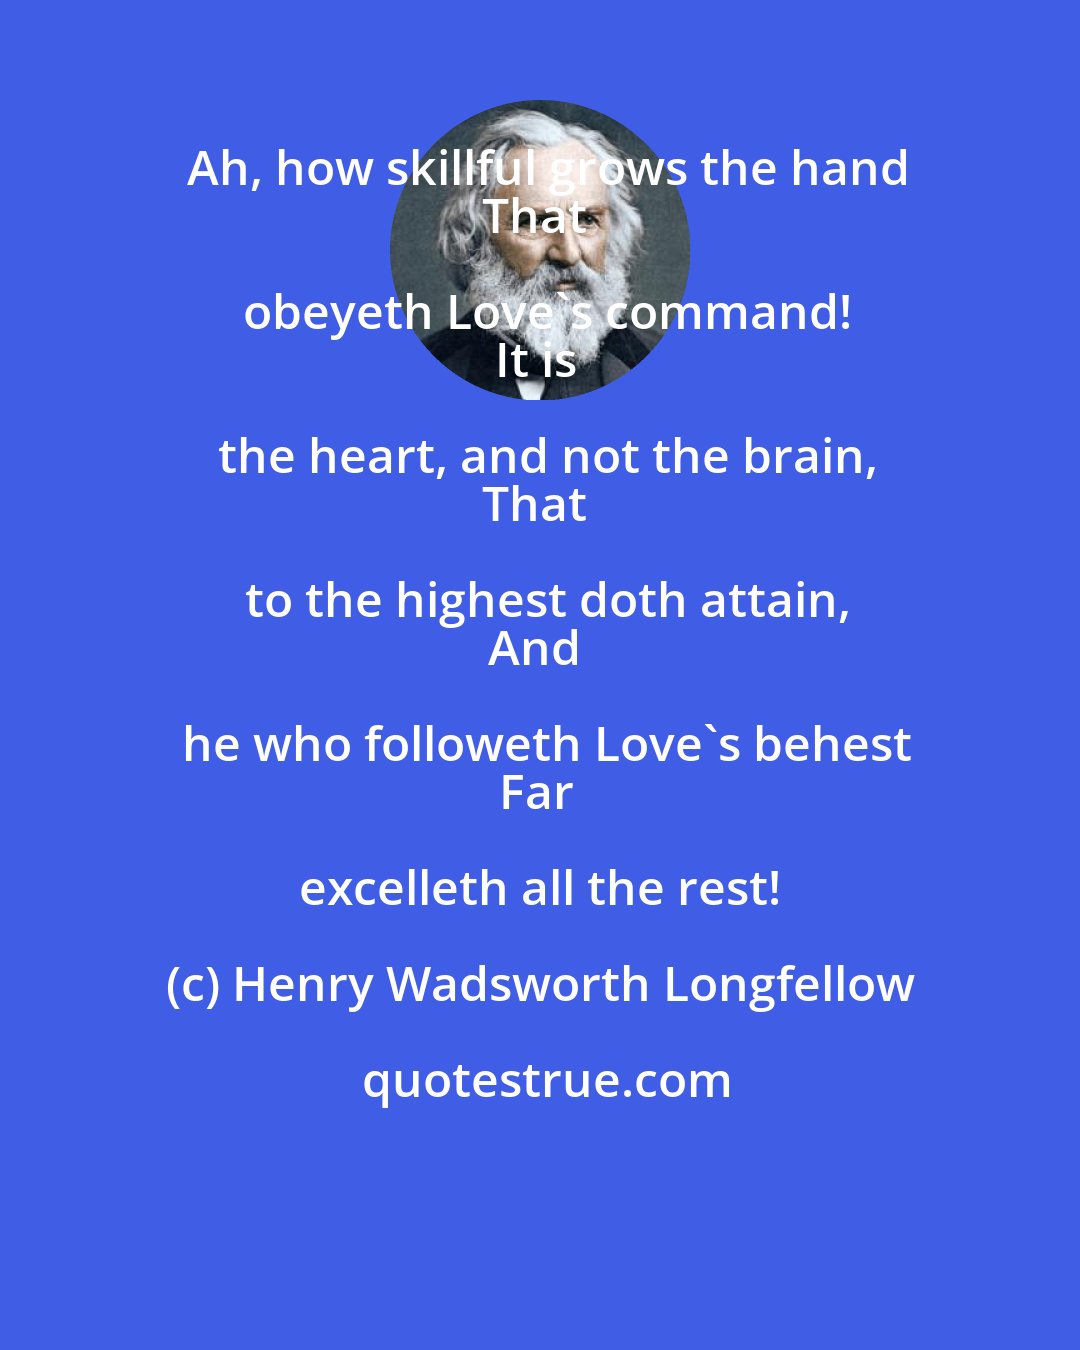 Henry Wadsworth Longfellow: Ah, how skillful grows the hand
That obeyeth Love's command!
It is the heart, and not the brain,
That to the highest doth attain,
And he who followeth Love's behest
Far excelleth all the rest!